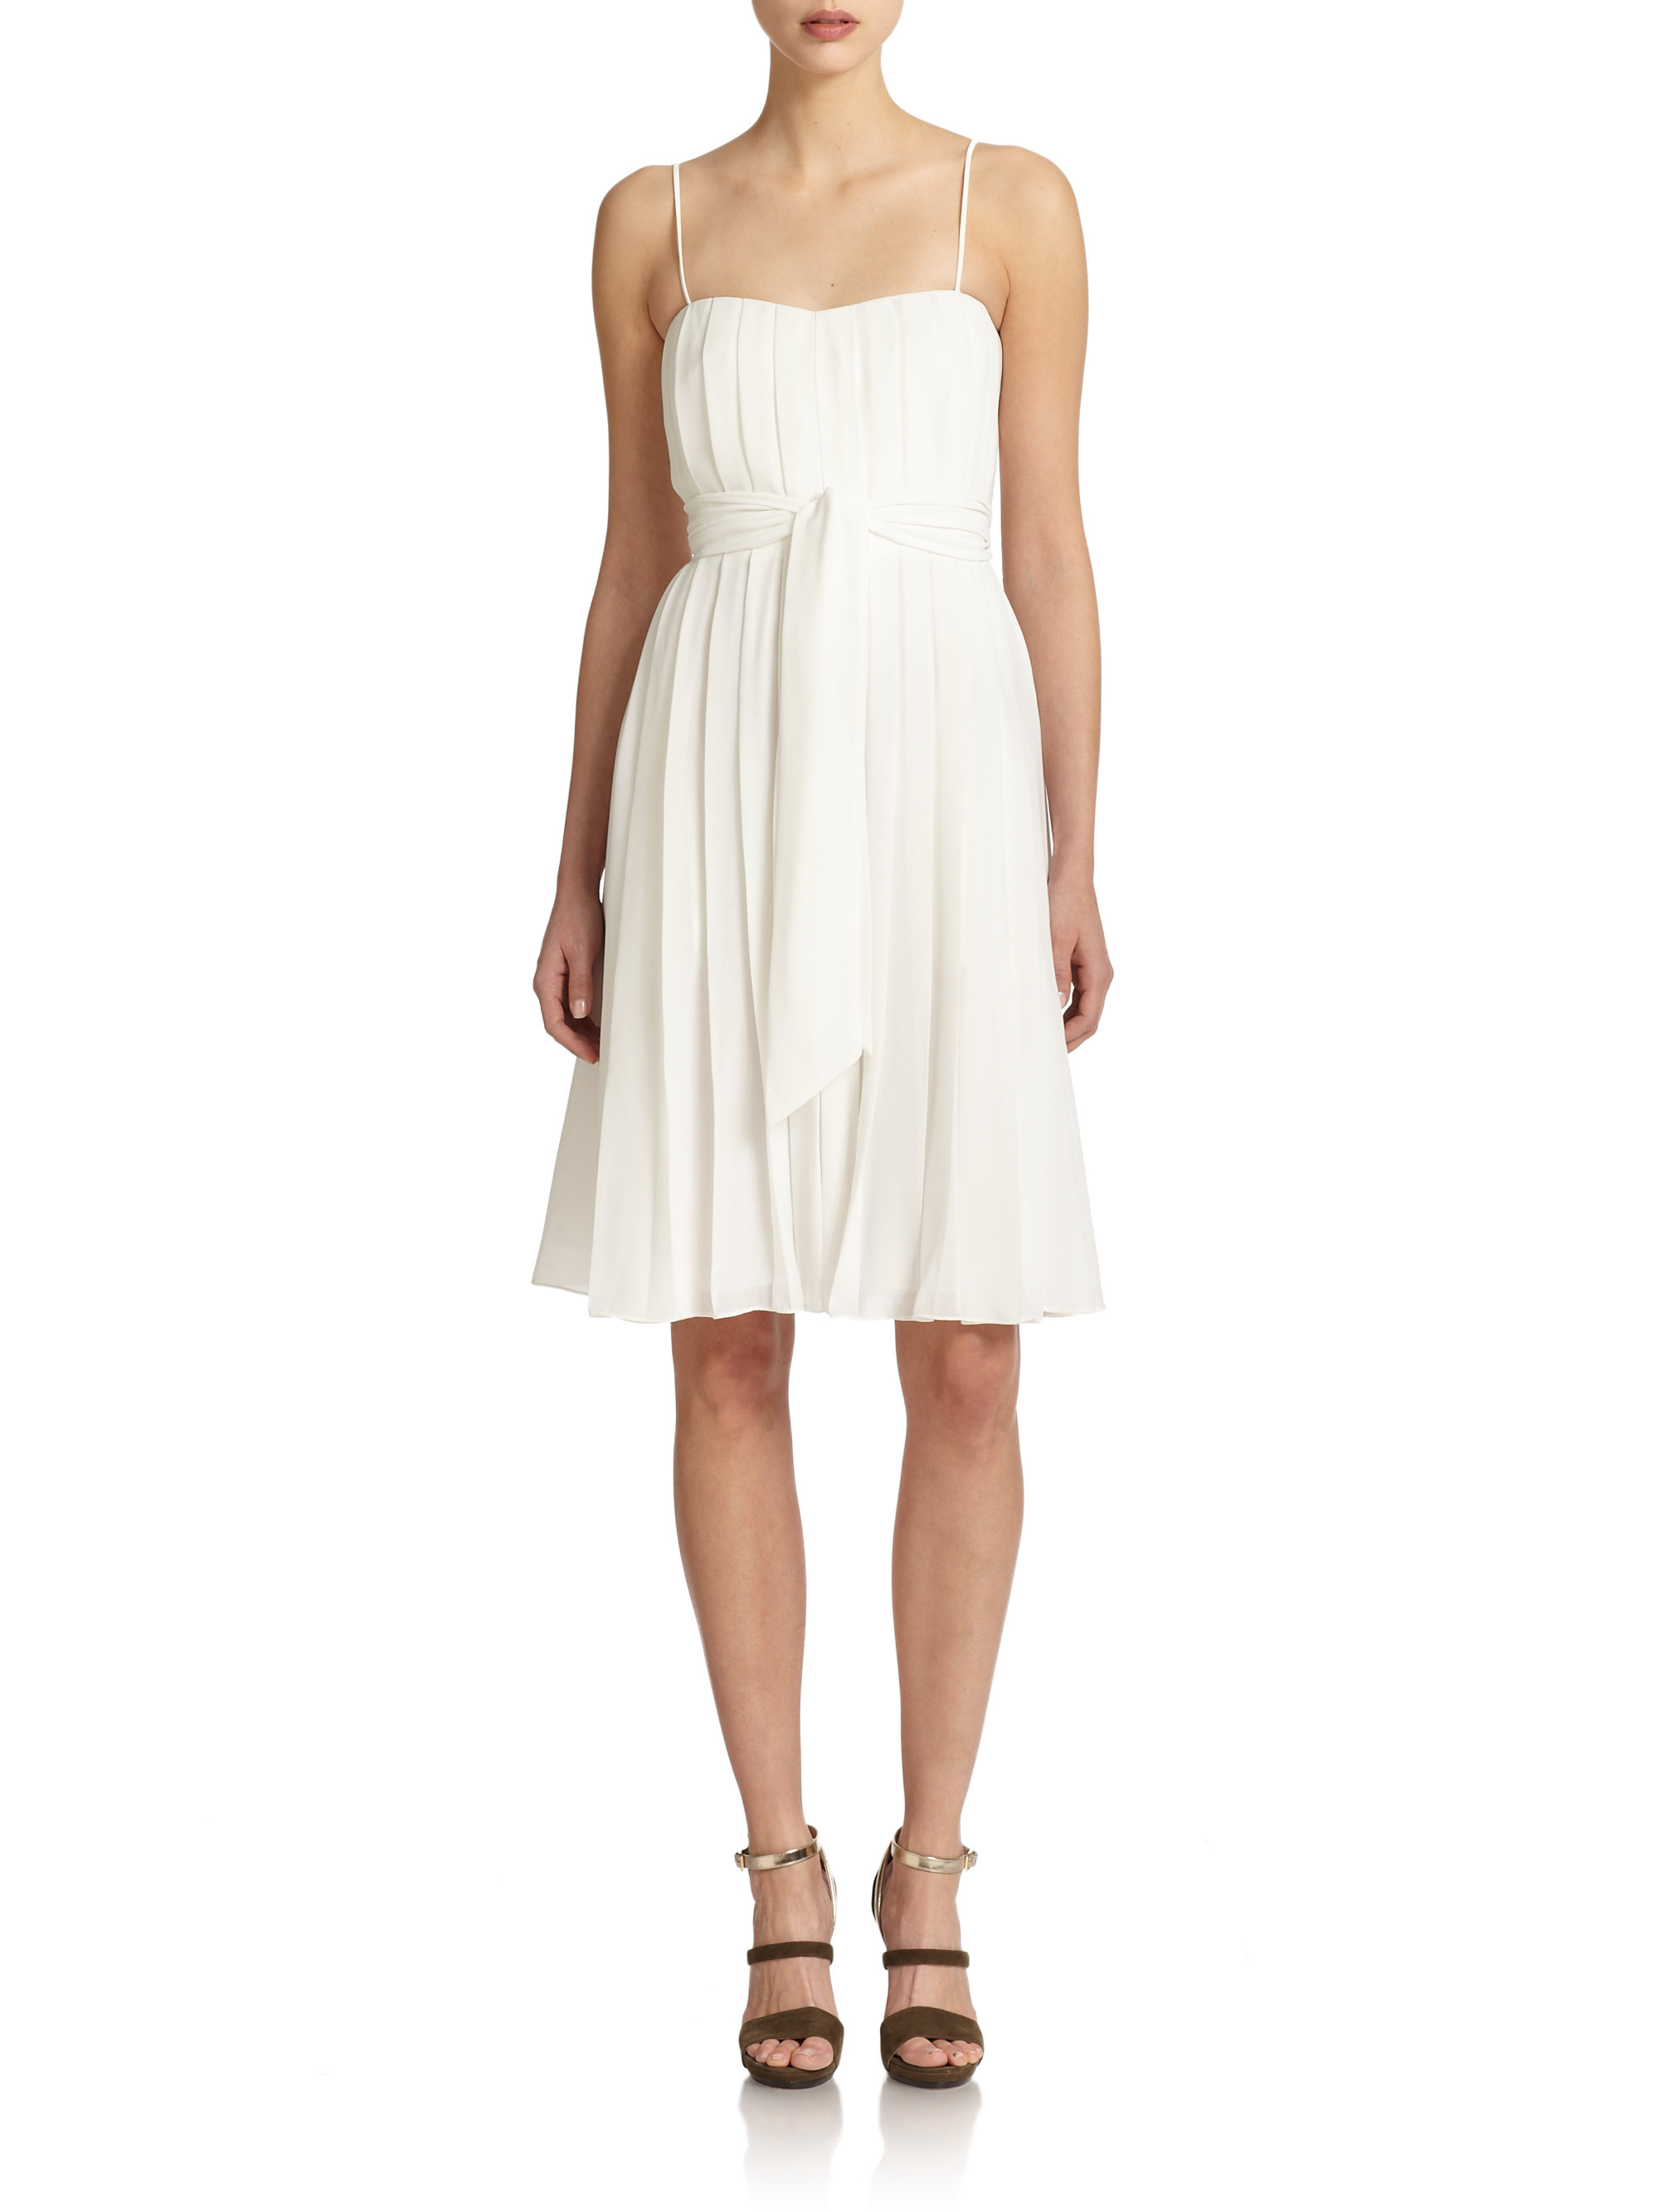 Lyst - L'Agence Pleated Chiffon Sash-belted Dress in White